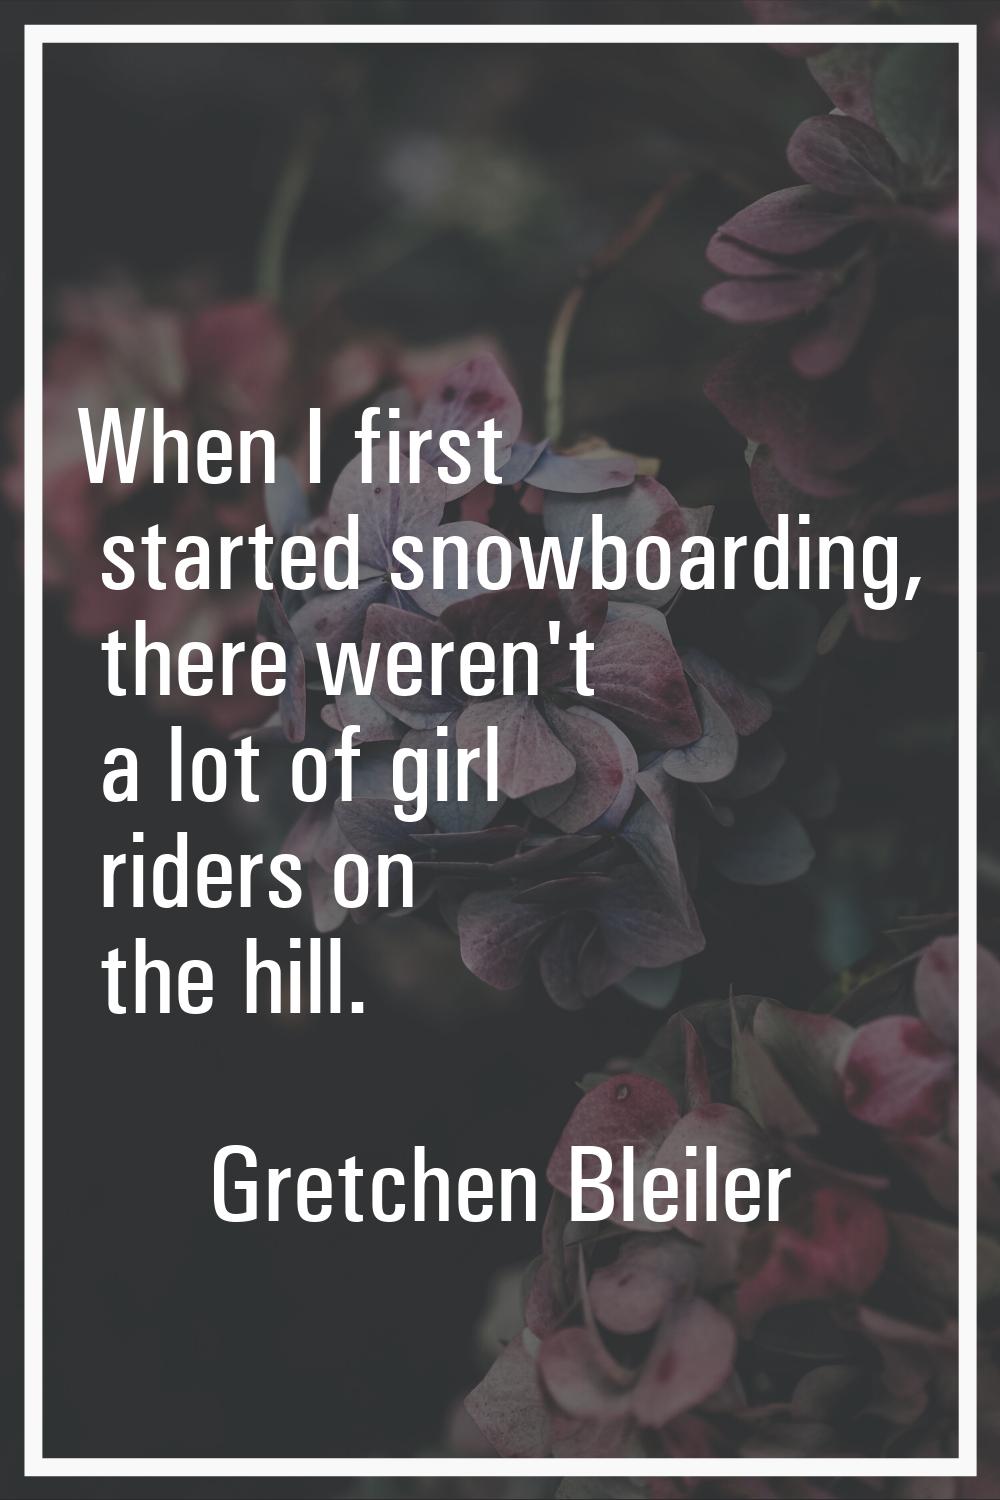 When I first started snowboarding, there weren't a lot of girl riders on the hill.